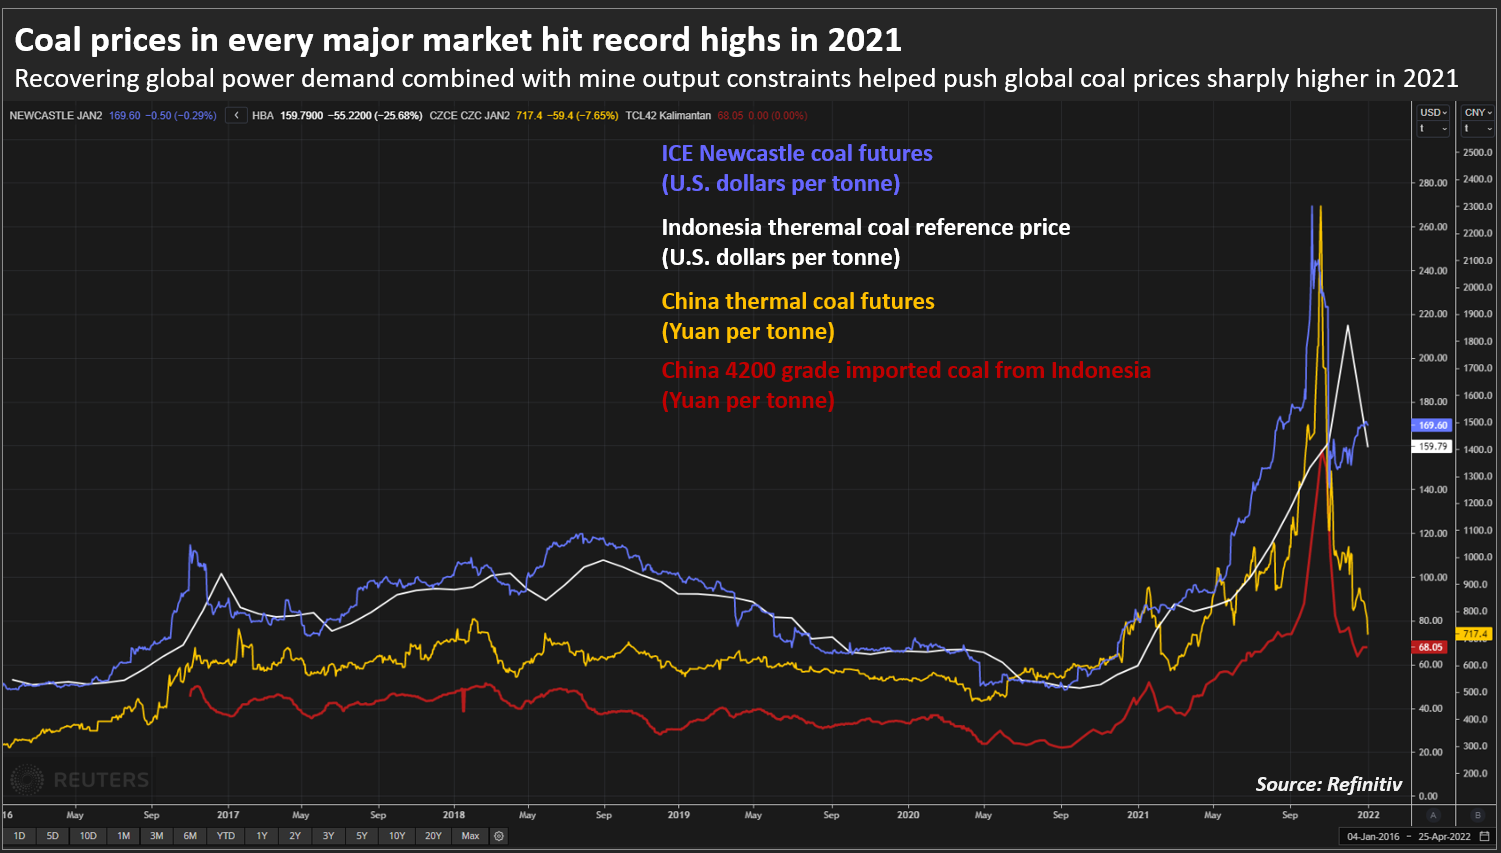 Coal prices in every major market hit record highs in 2021